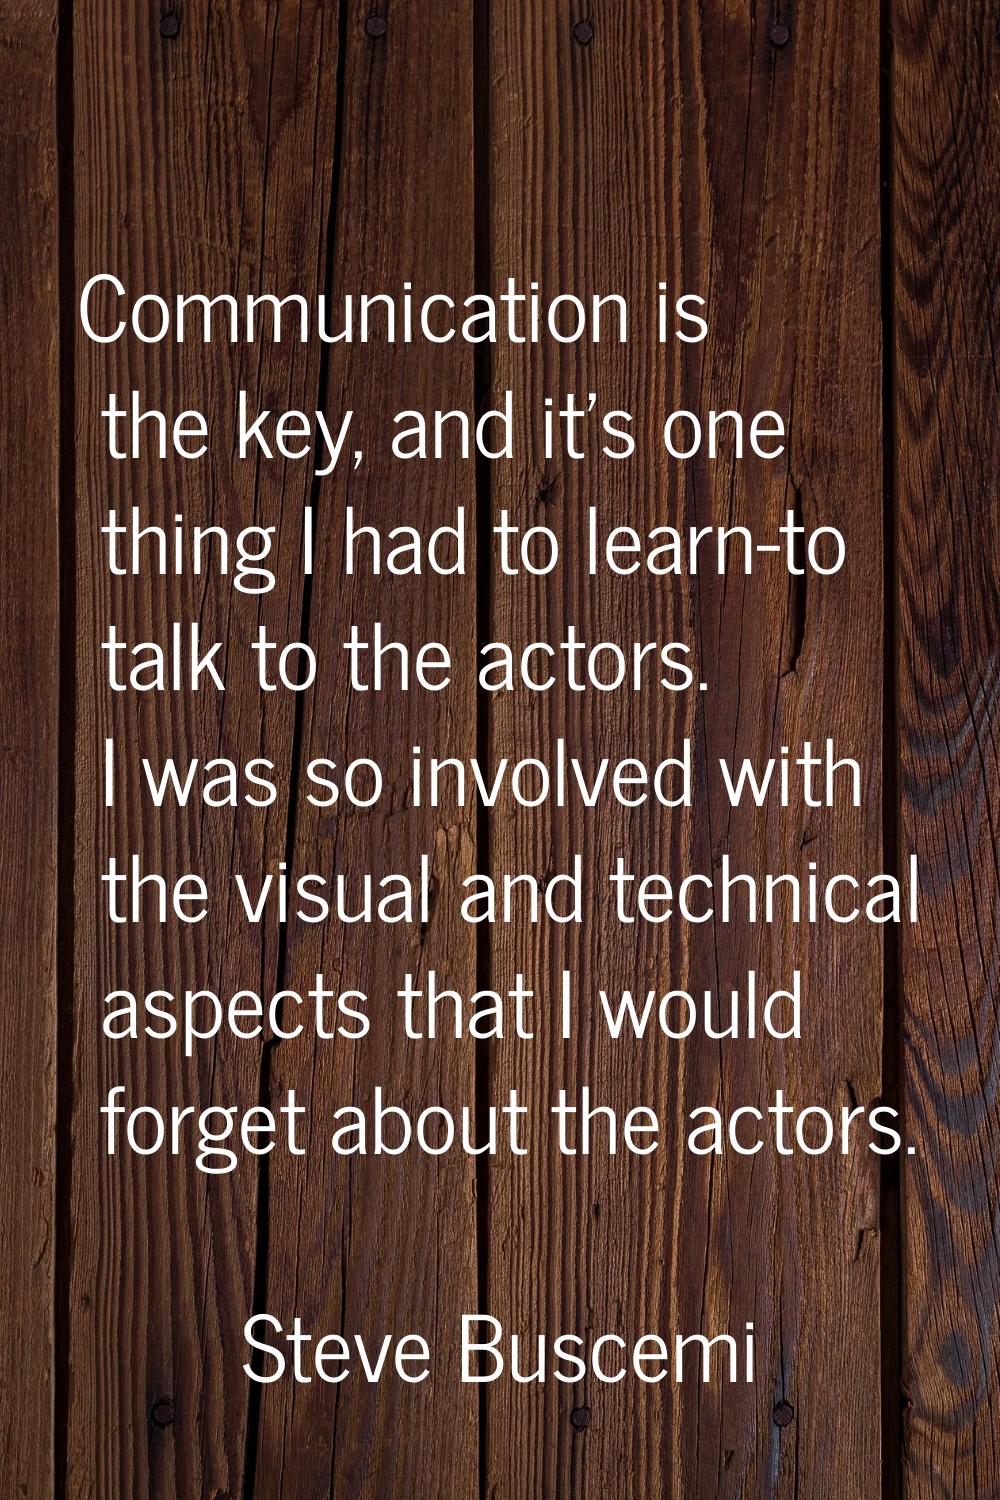 Communication is the key, and it's one thing I had to learn-to talk to the actors. I was so involve